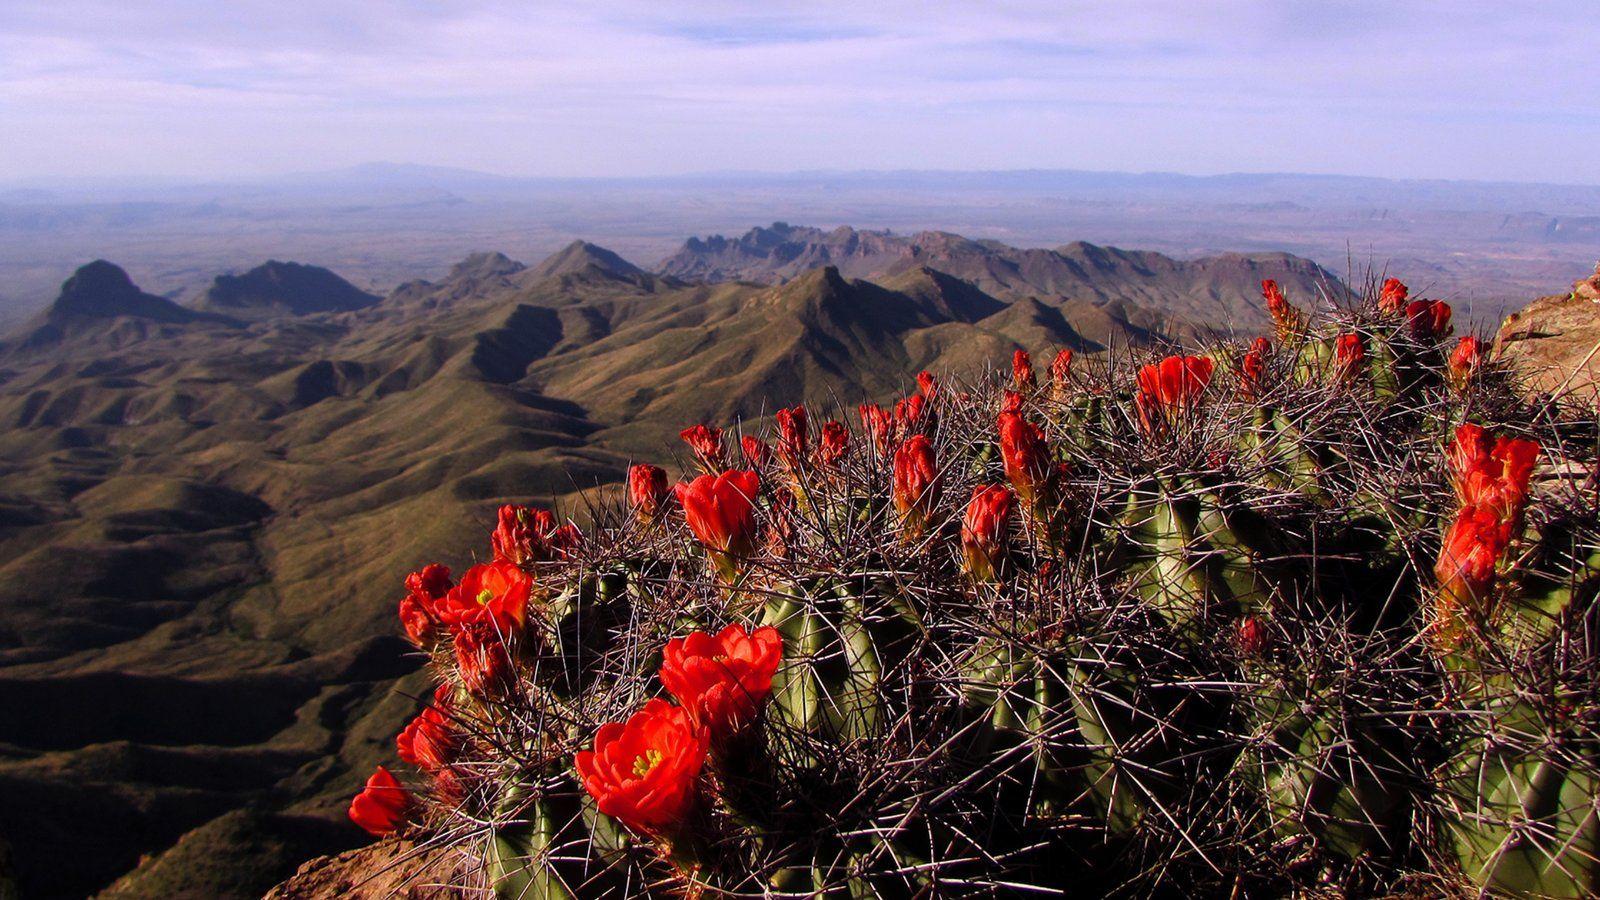 Big Bend National Park Picture: View Photo & Image of Big Bend